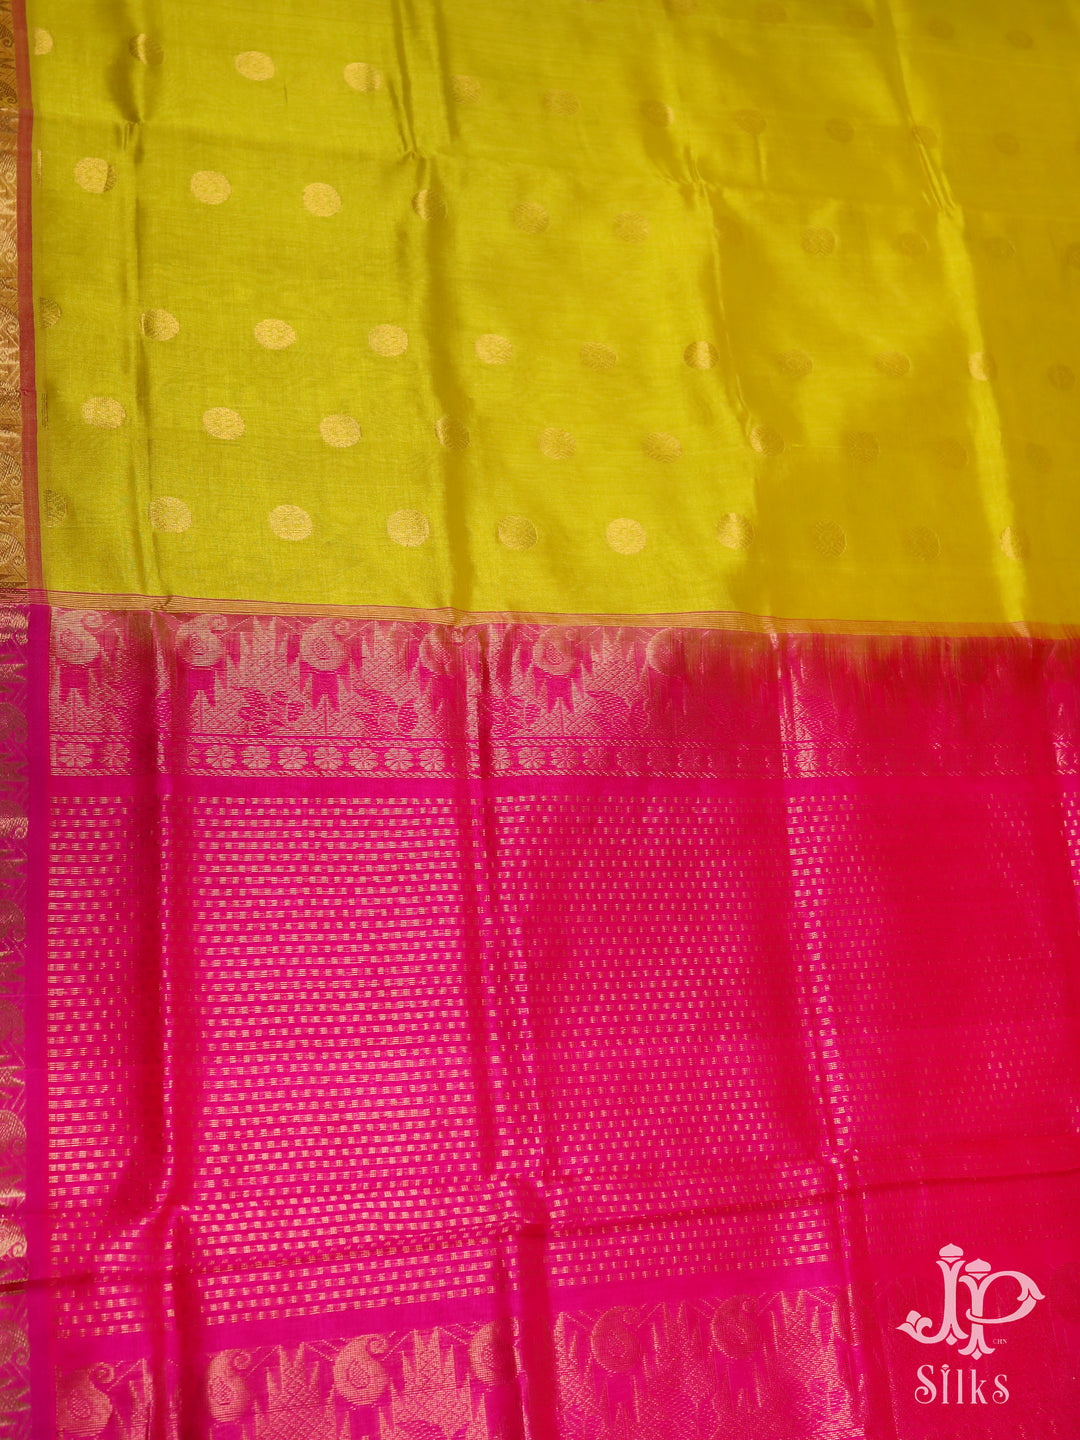 Olive Green and Rani Pink Silk Cotton Saree - D7413 - View 3